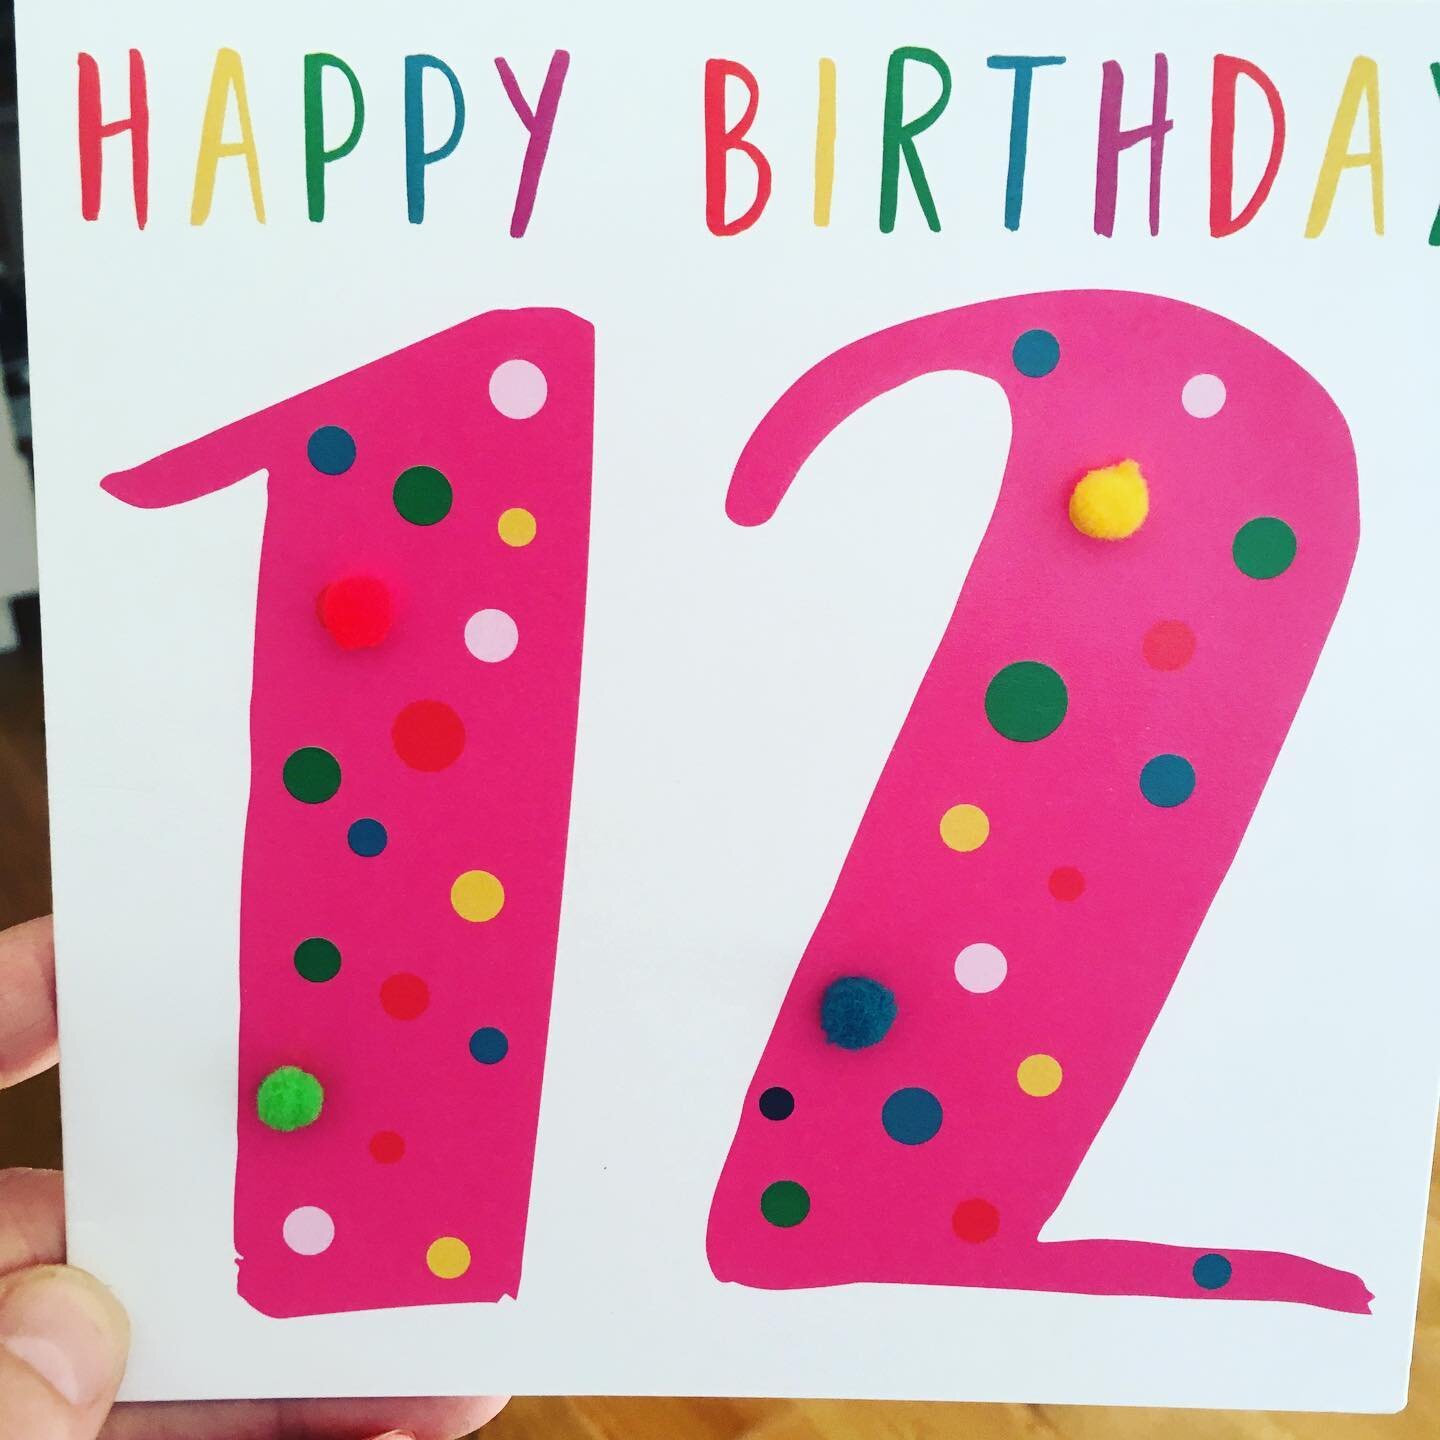 Woohoo! 🎂🎉😊 We&rsquo;re 12 today! Hip hip hooray! When I opened the shop I crossed my fingers 🤞 and signed a 3 year lease. I knew it I was a bit mad but I&rsquo;d always wanted to do it and sometimes you just need to take a leap of faith. Thanks 